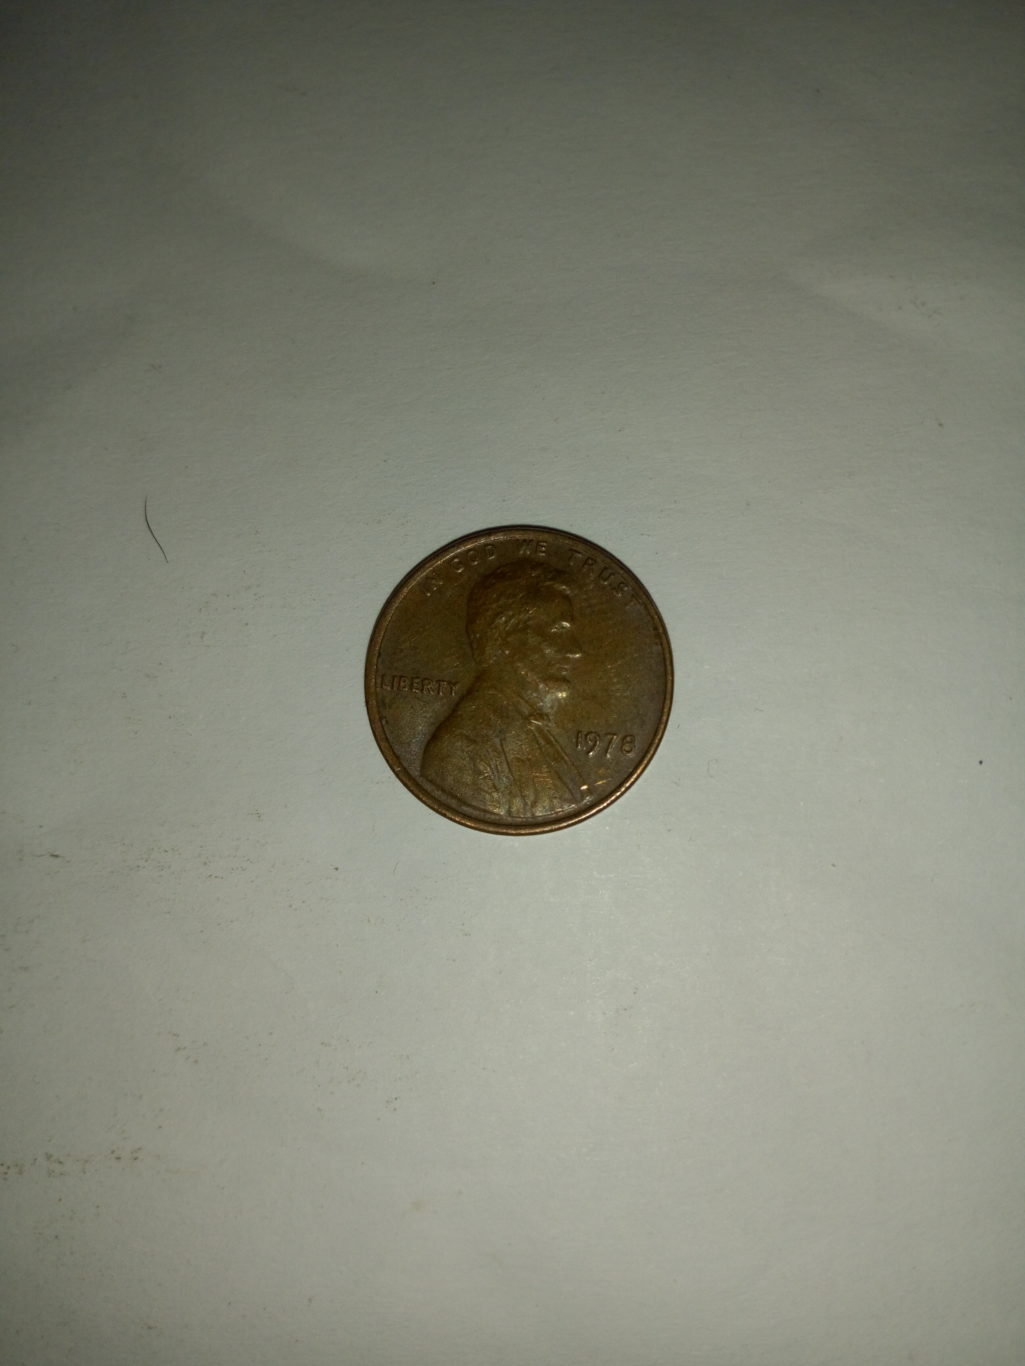 1978_united States of America 1 cent